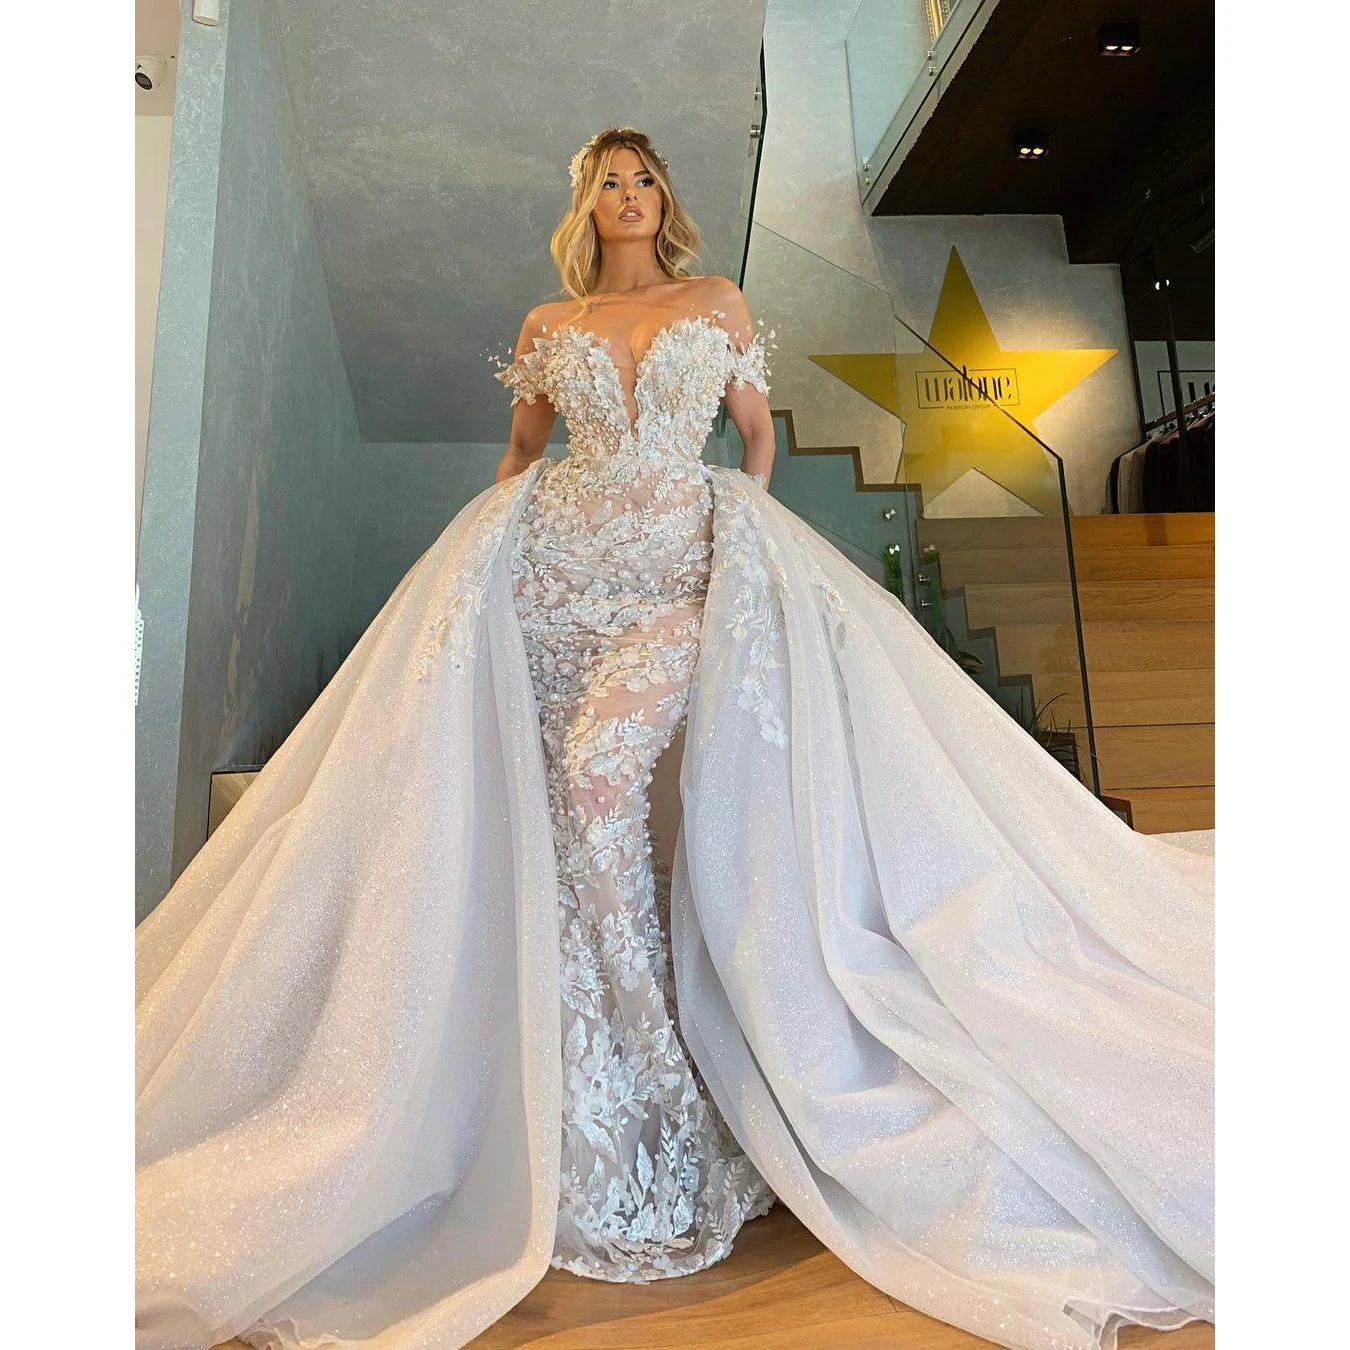 Charming Elgant Mermaid Wedding Dresses Off The Shoulder Beaded Appliques Long Train Women Party Gowns Plus Size Custom Made